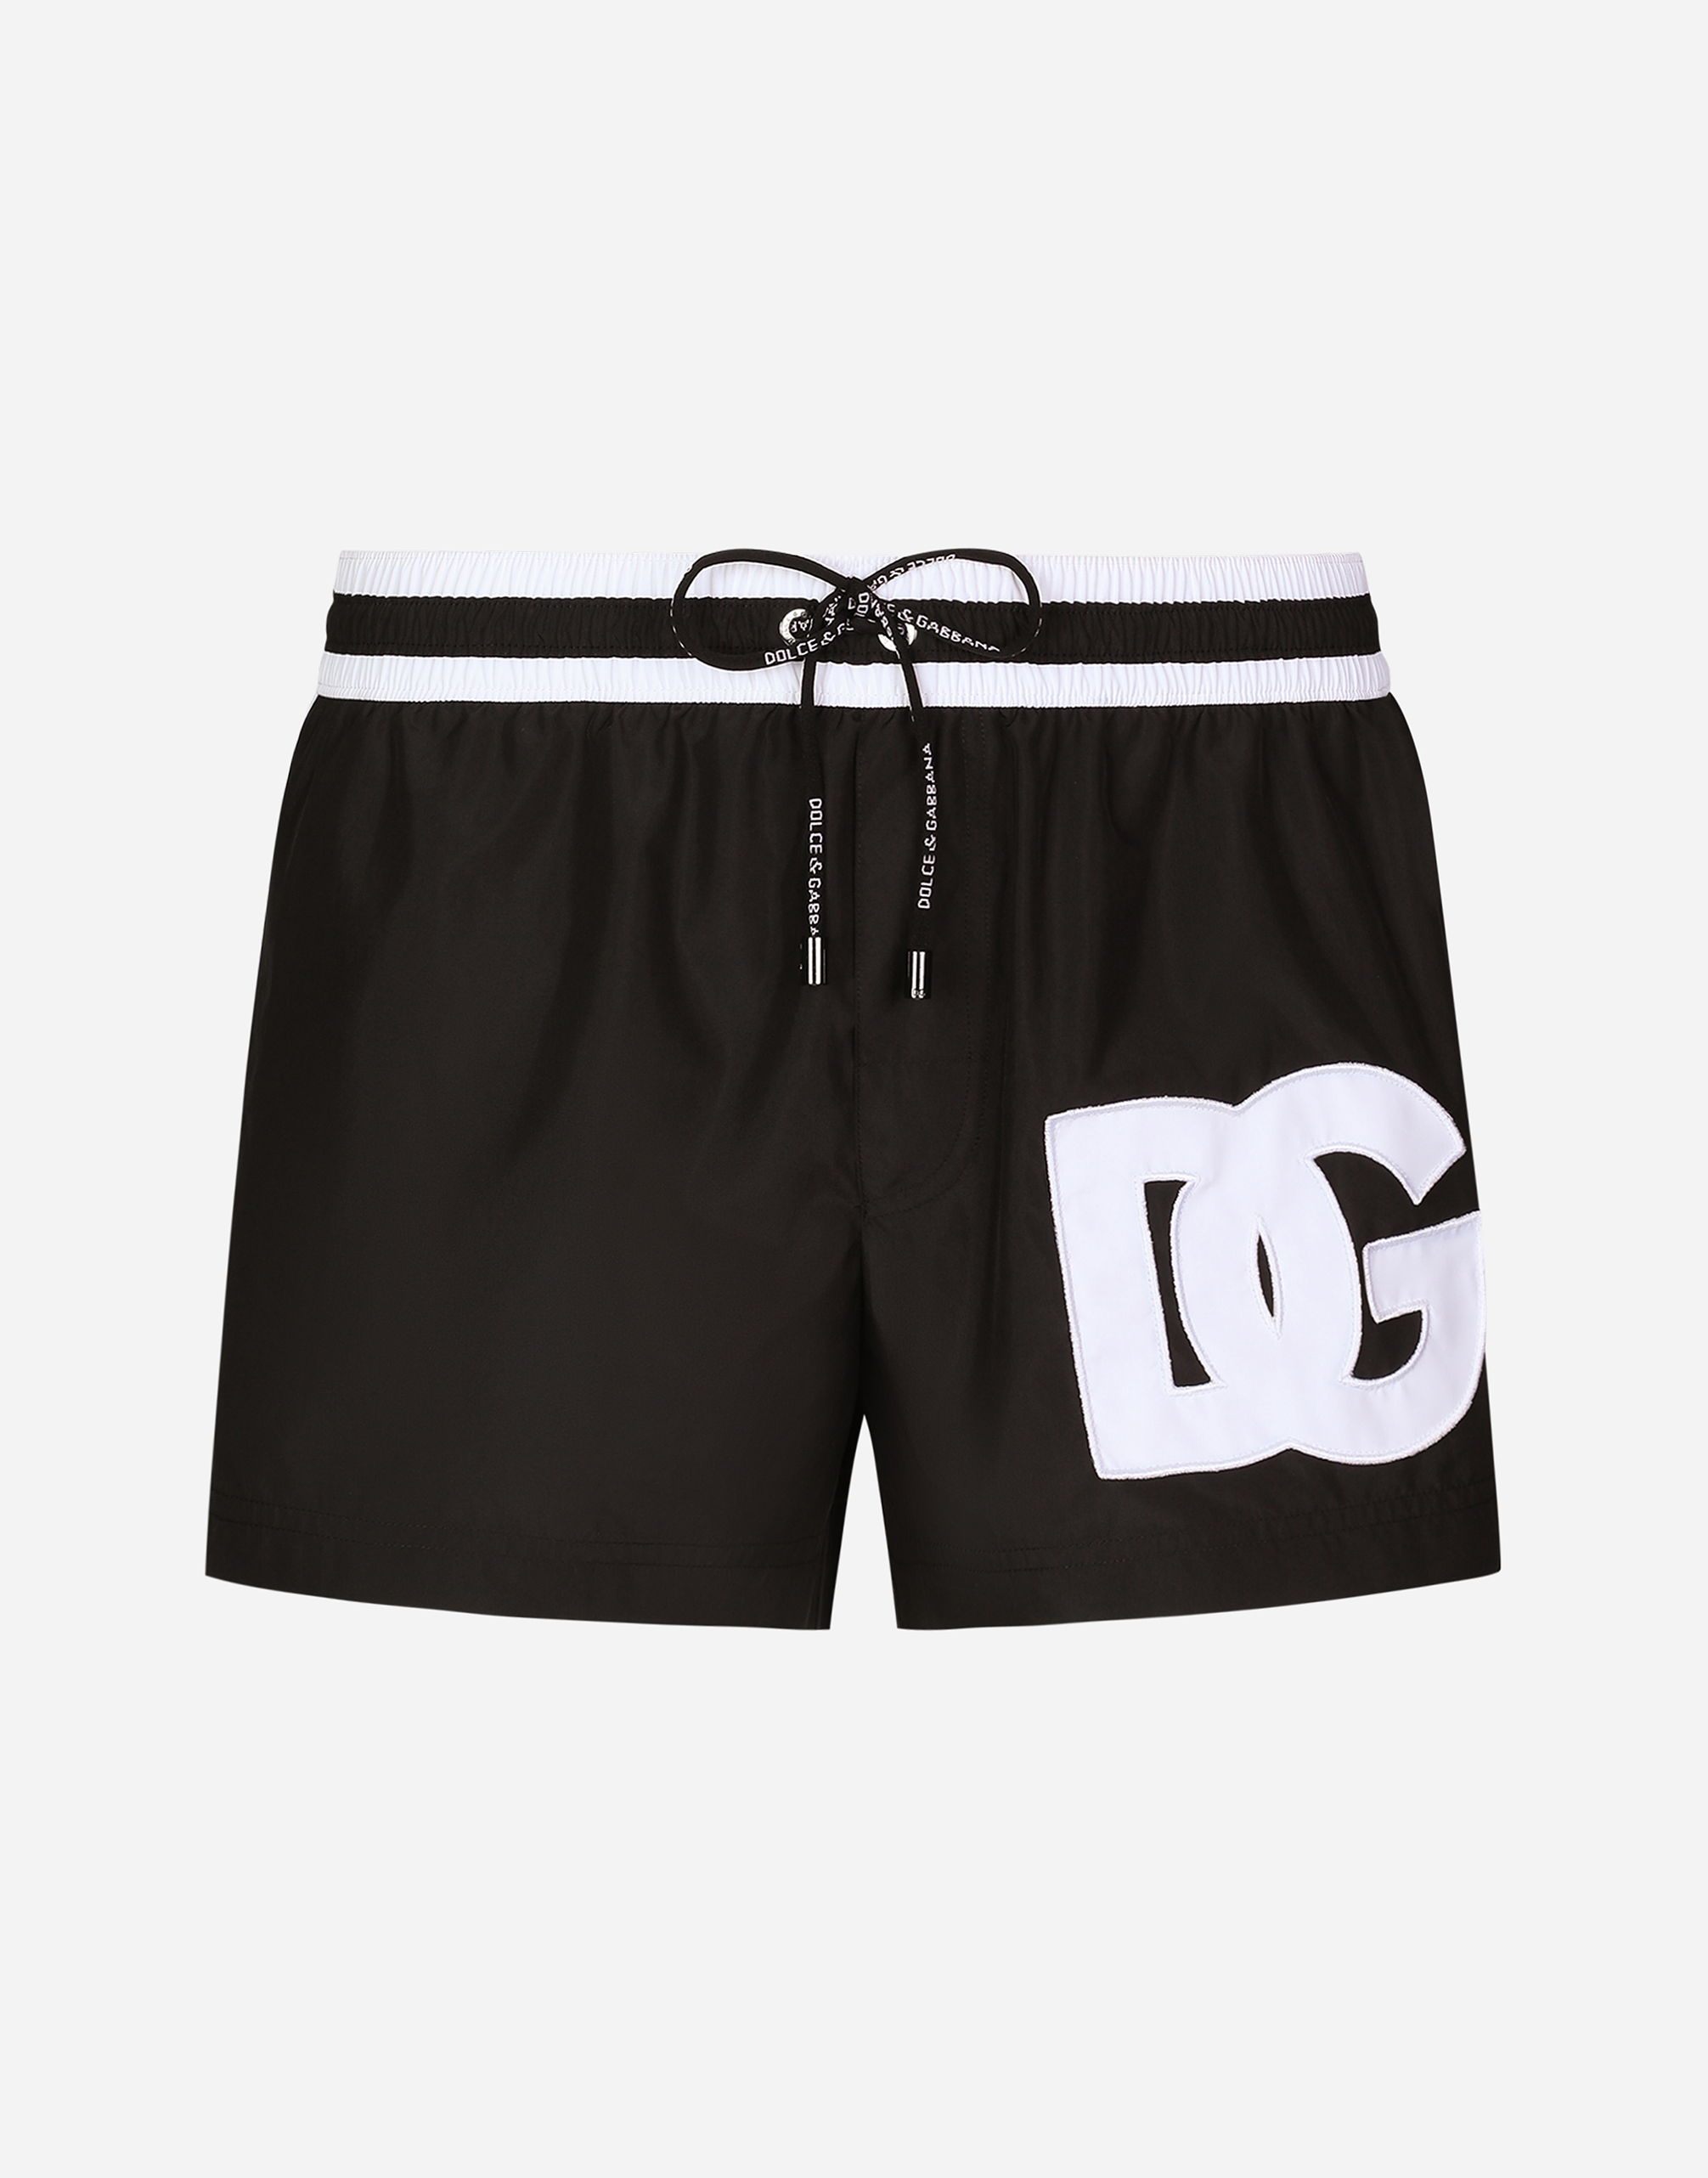 Dolce & Gabbana Short Swim Trunks With Dg Patch In Multicolor